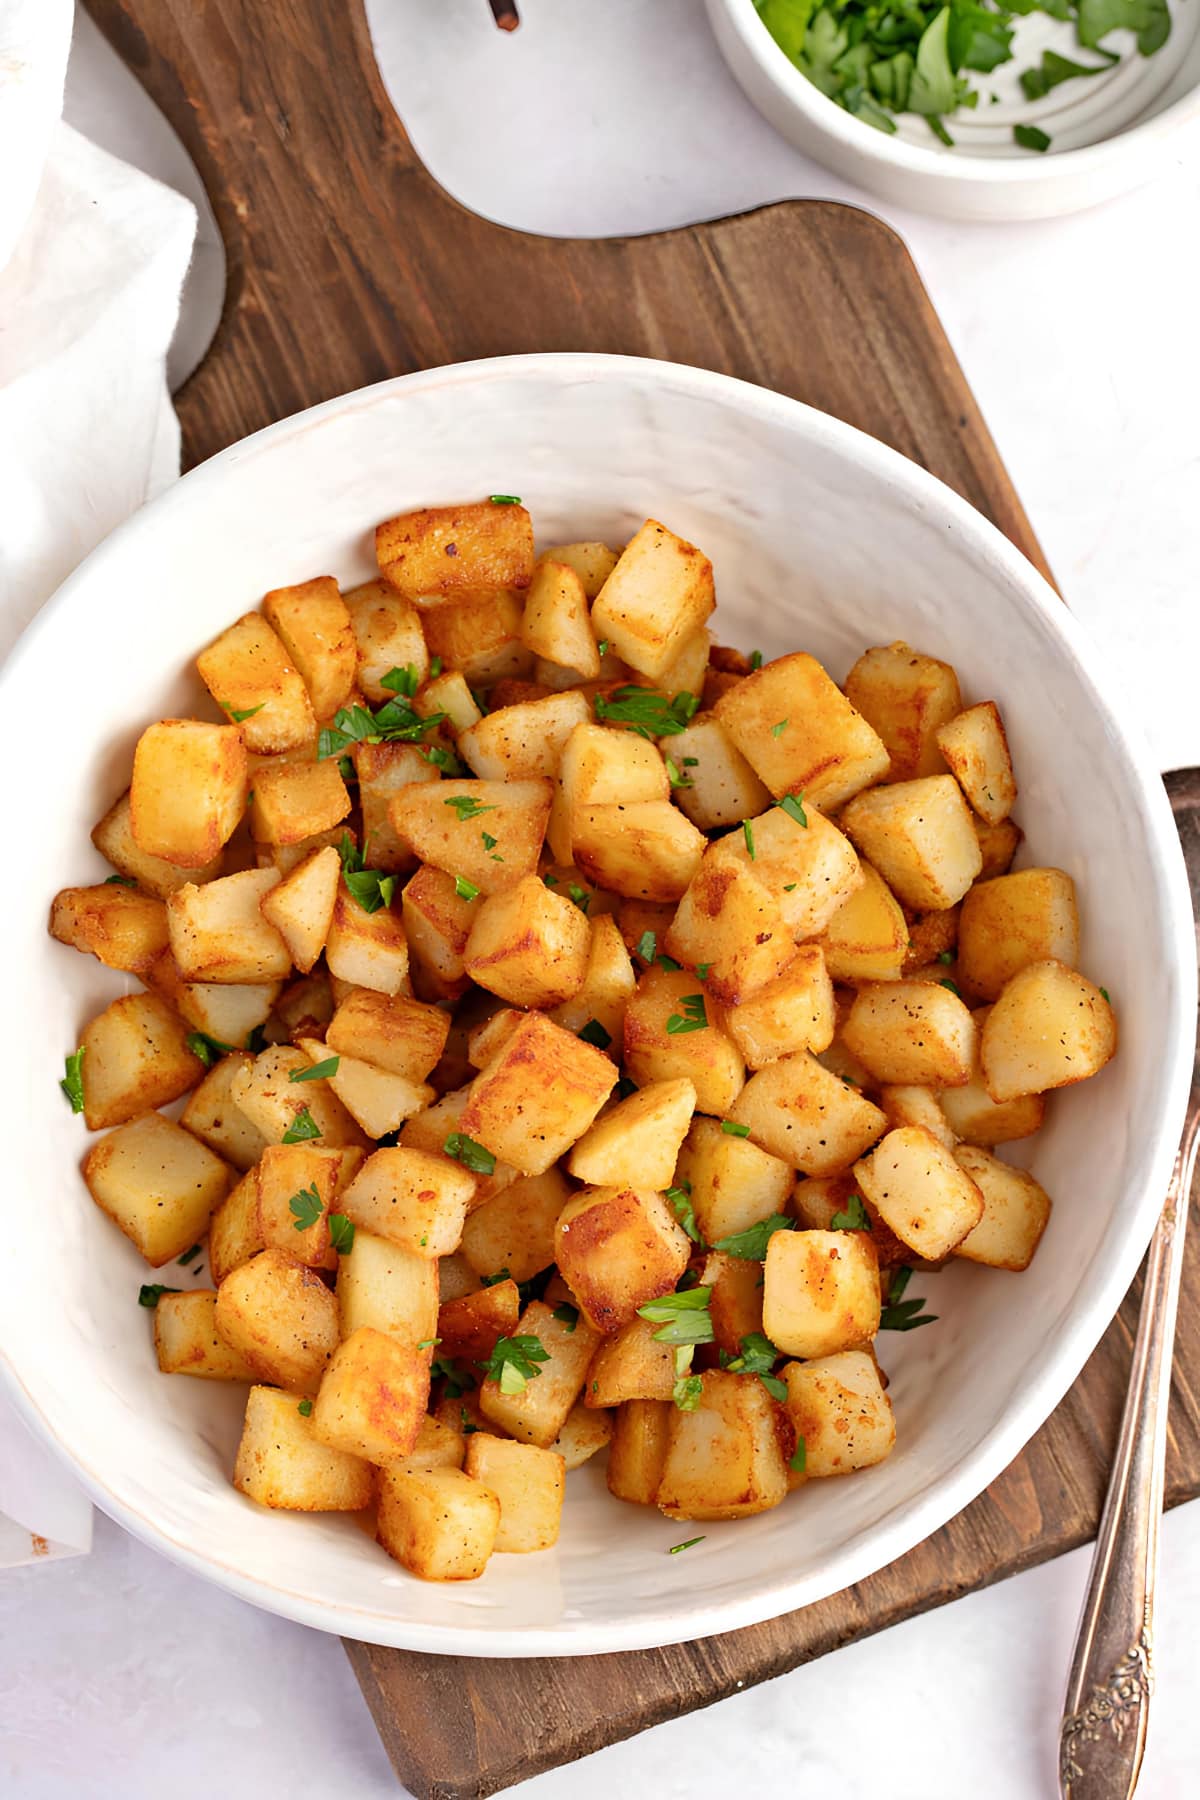 Bowl of Home Fries with Butter, Salt and Pepper 